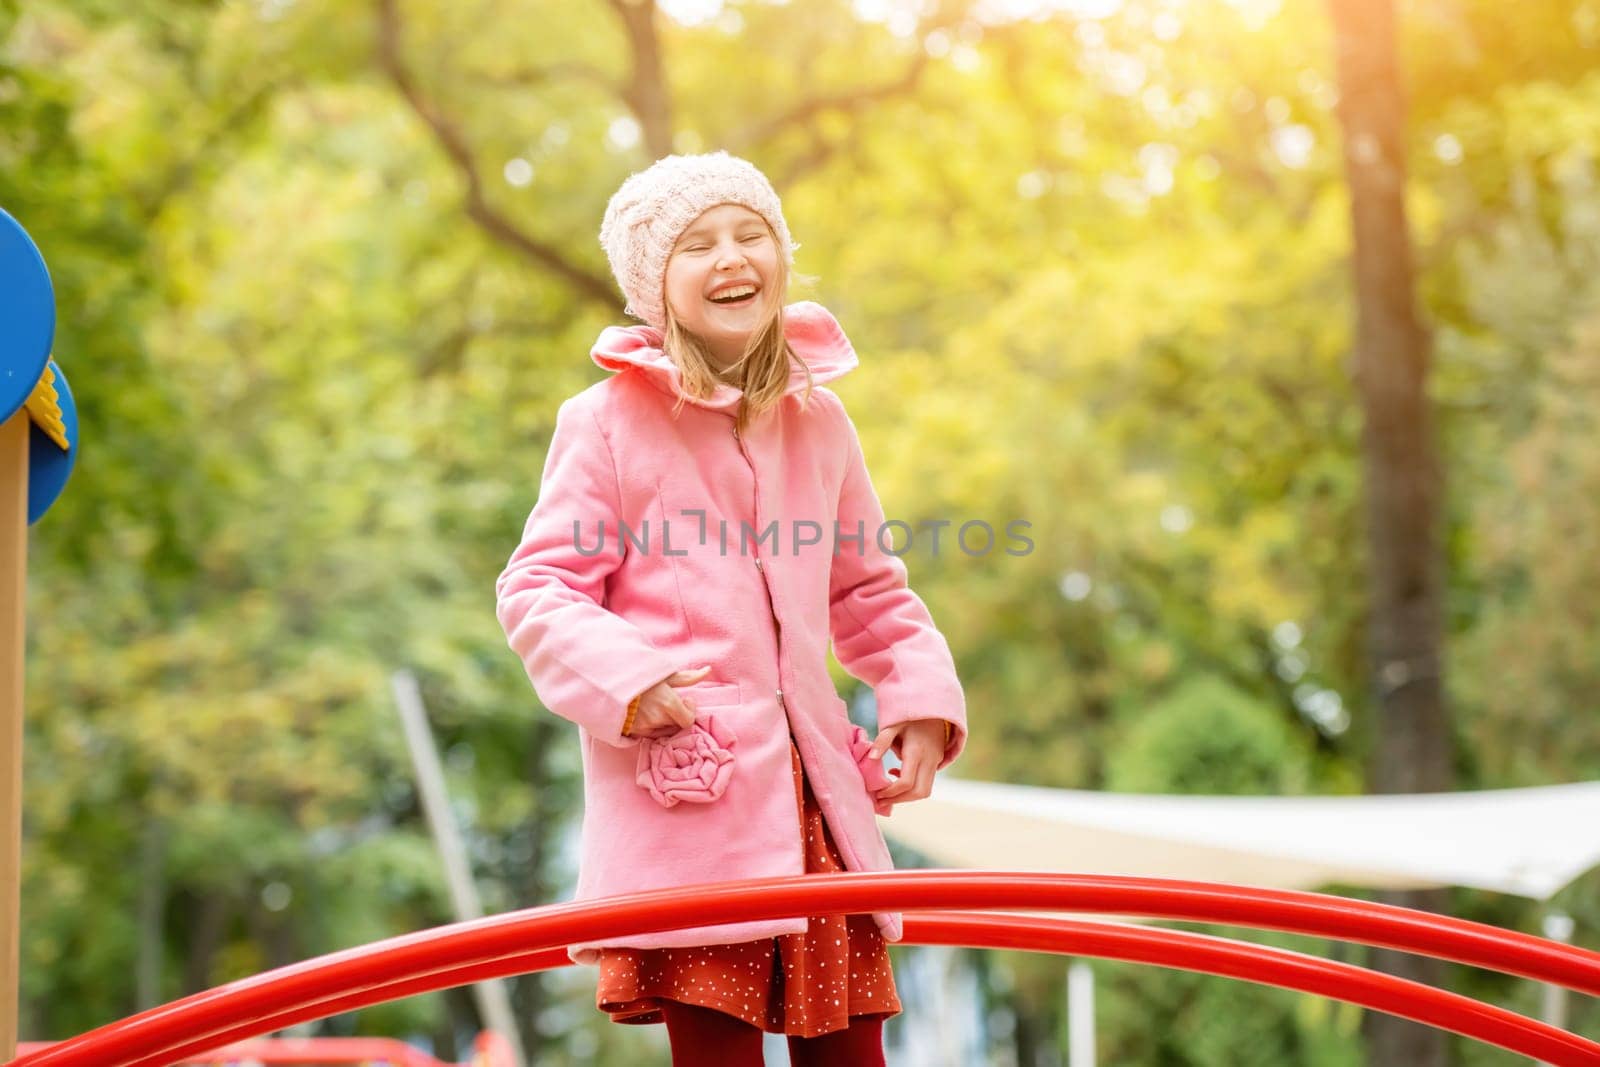 Pretty girl kid playing on playground at autumn day outdoors and laughing. Female child having fun nd smiling at the street